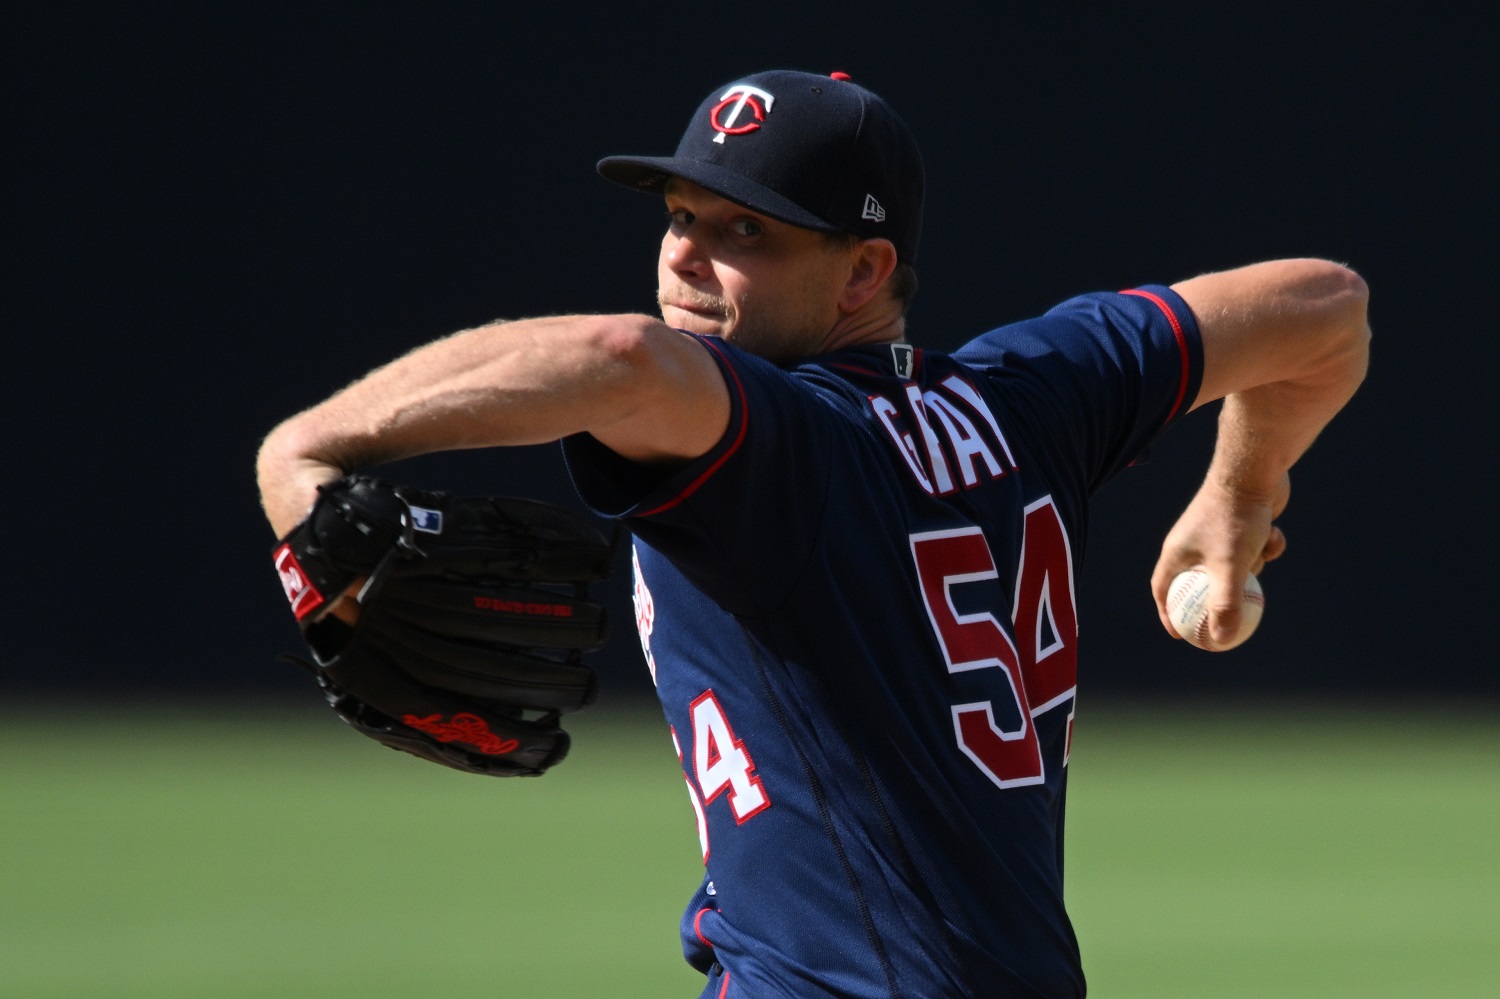 Sonny Gray pitches Twins to 3-1 win over ChiSox